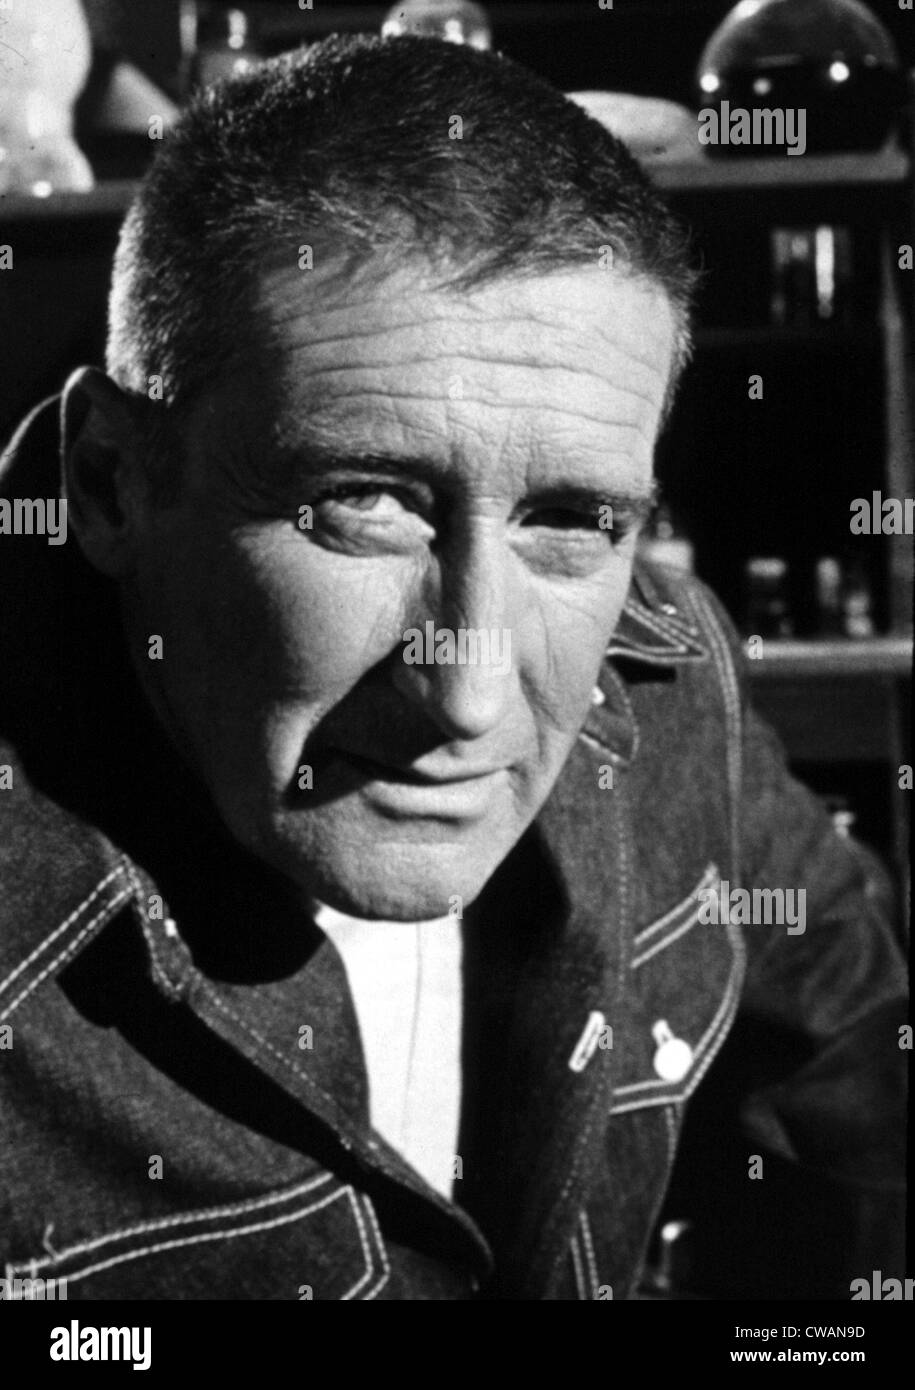 MICKEY SPILLANE, 1974 Archives CSU/Everett Collection Banque D'Images